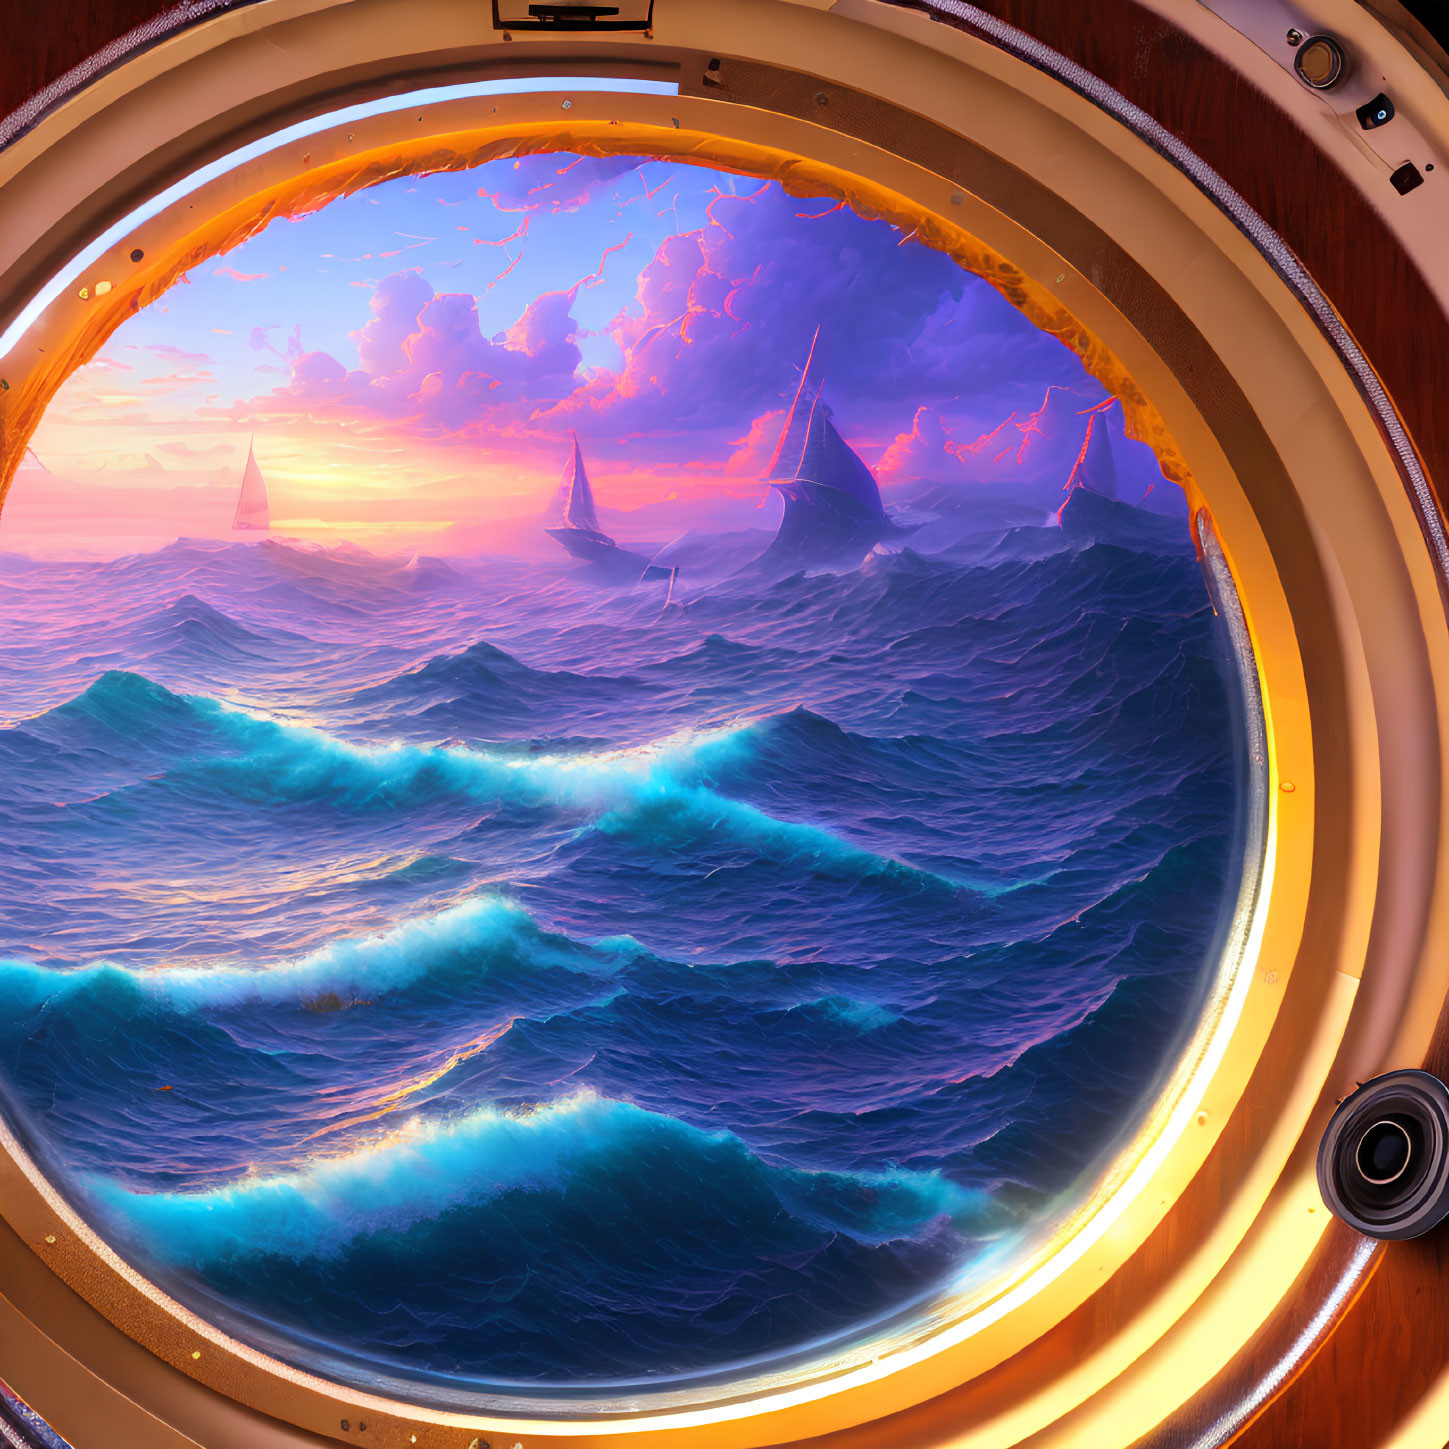 In the porthole